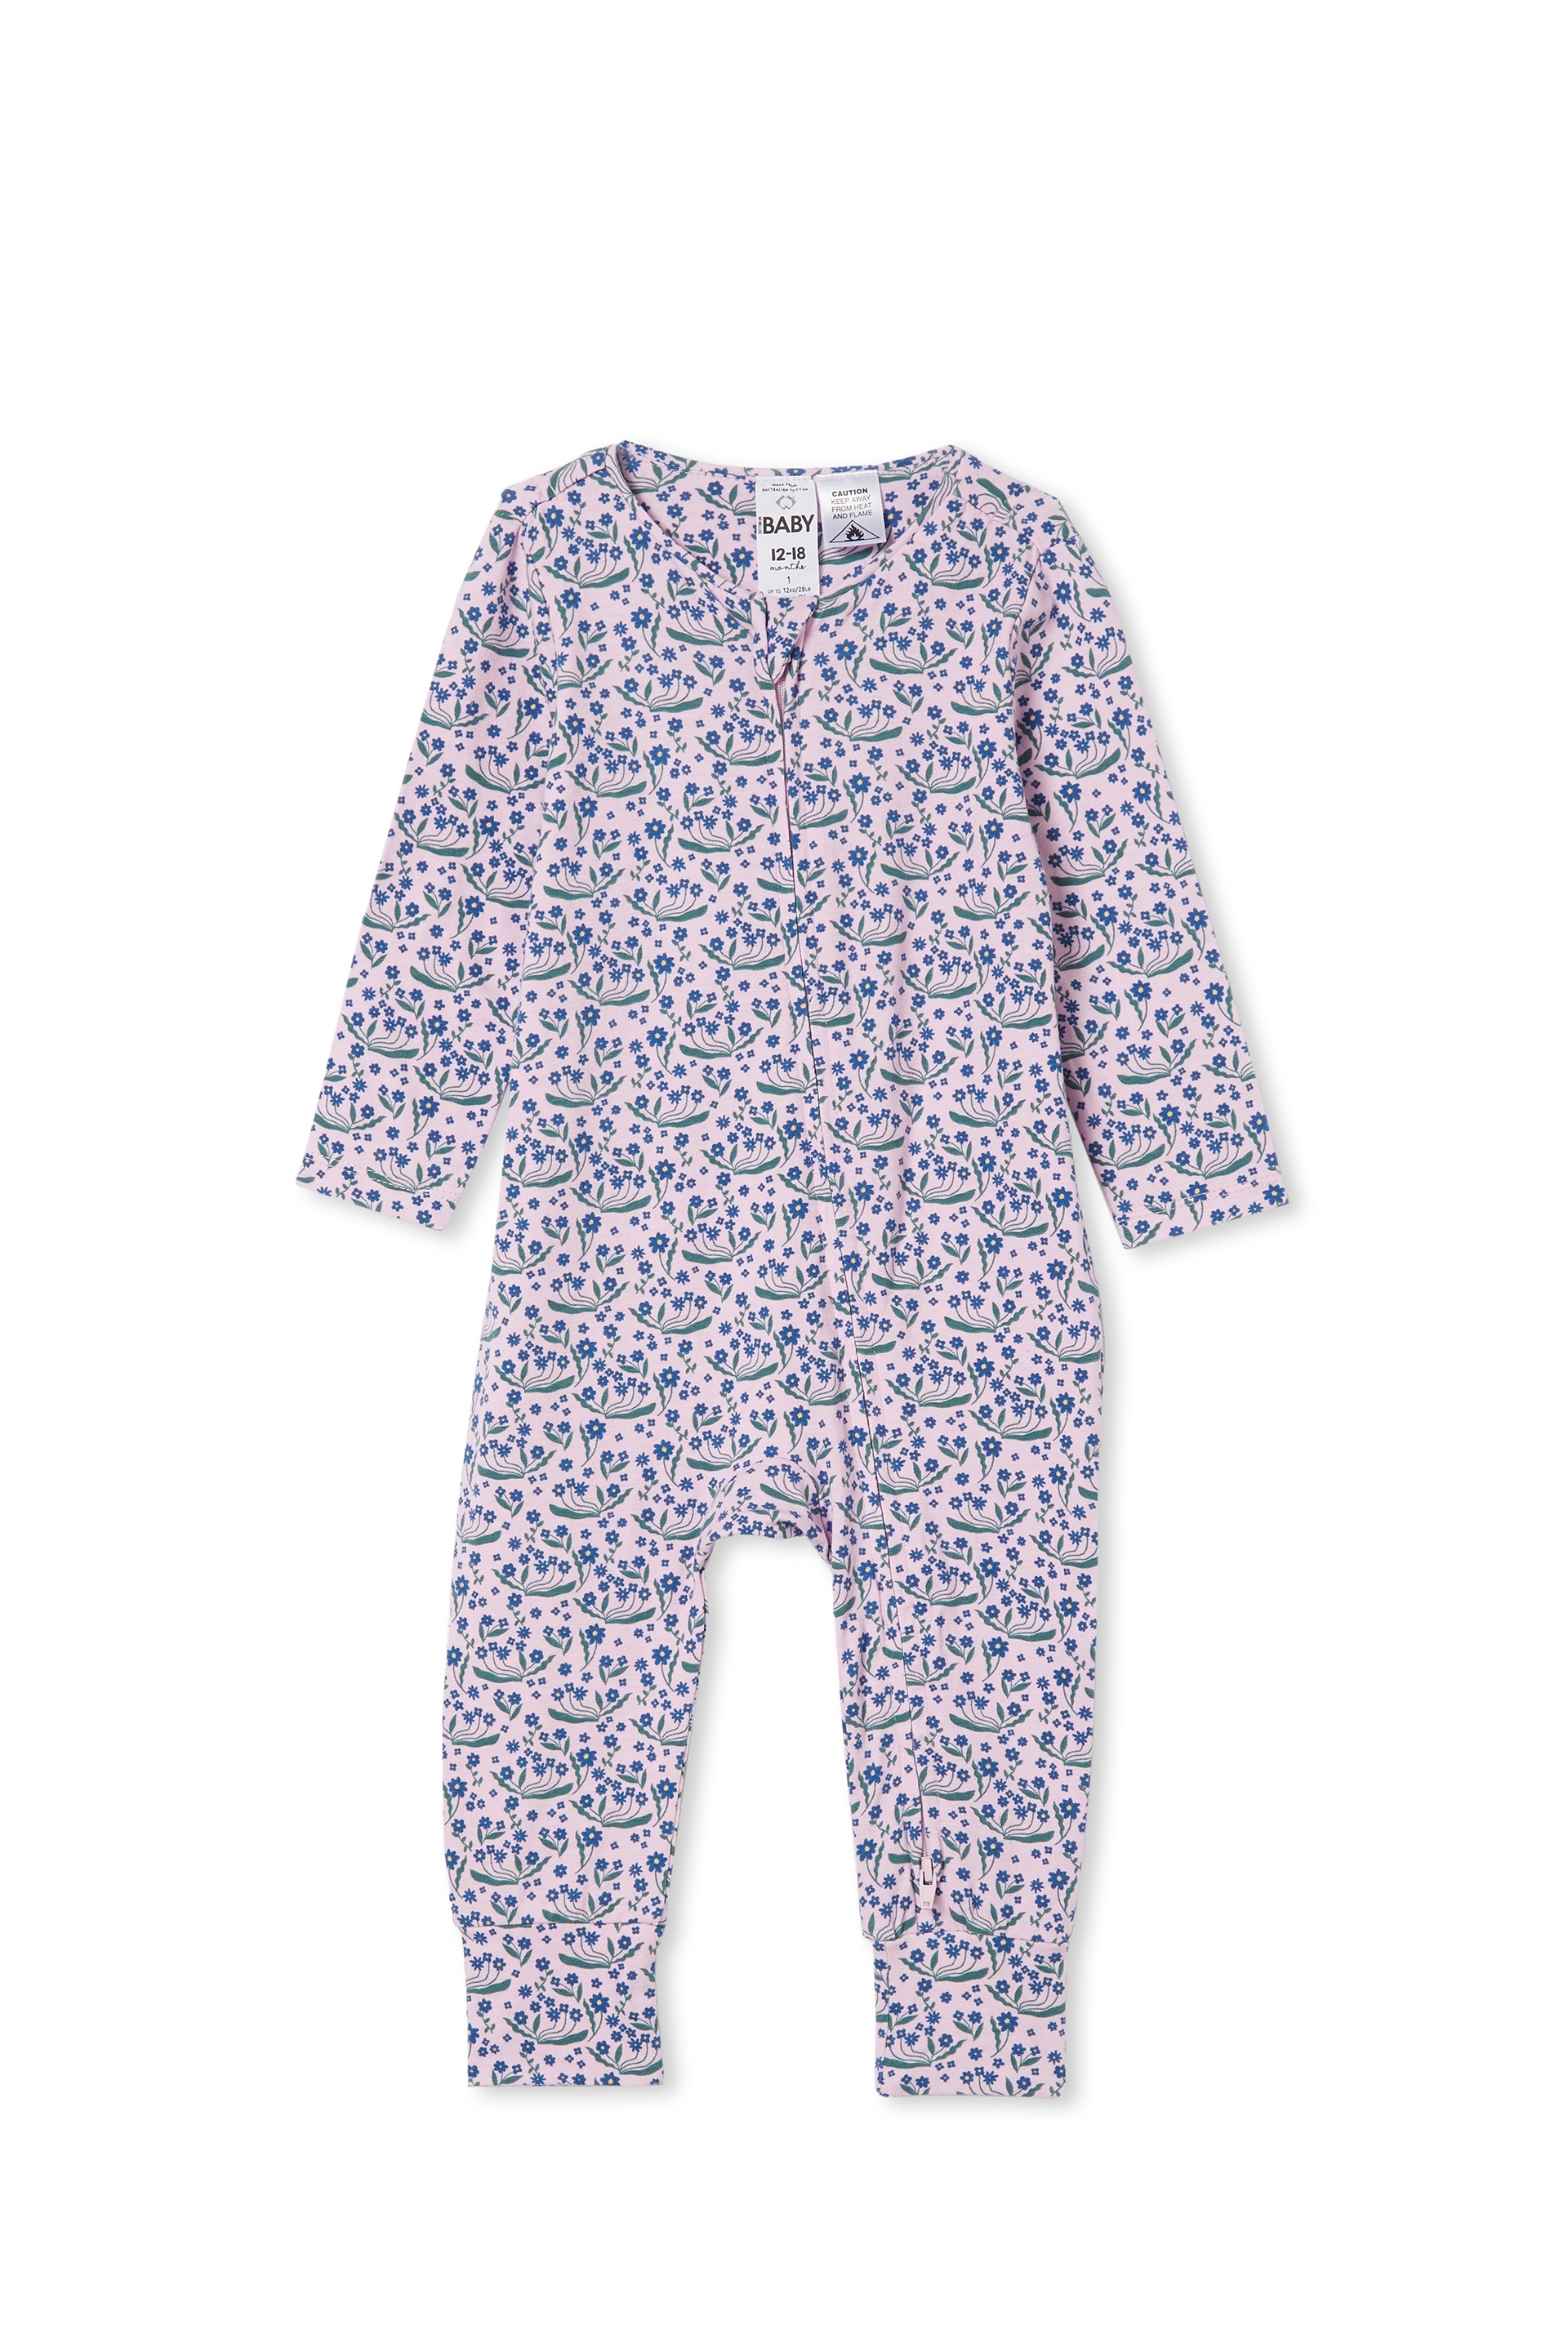 Cotton On Kids - The Long Sleeve Footless Zip Romper - Pale violet/daisy garden